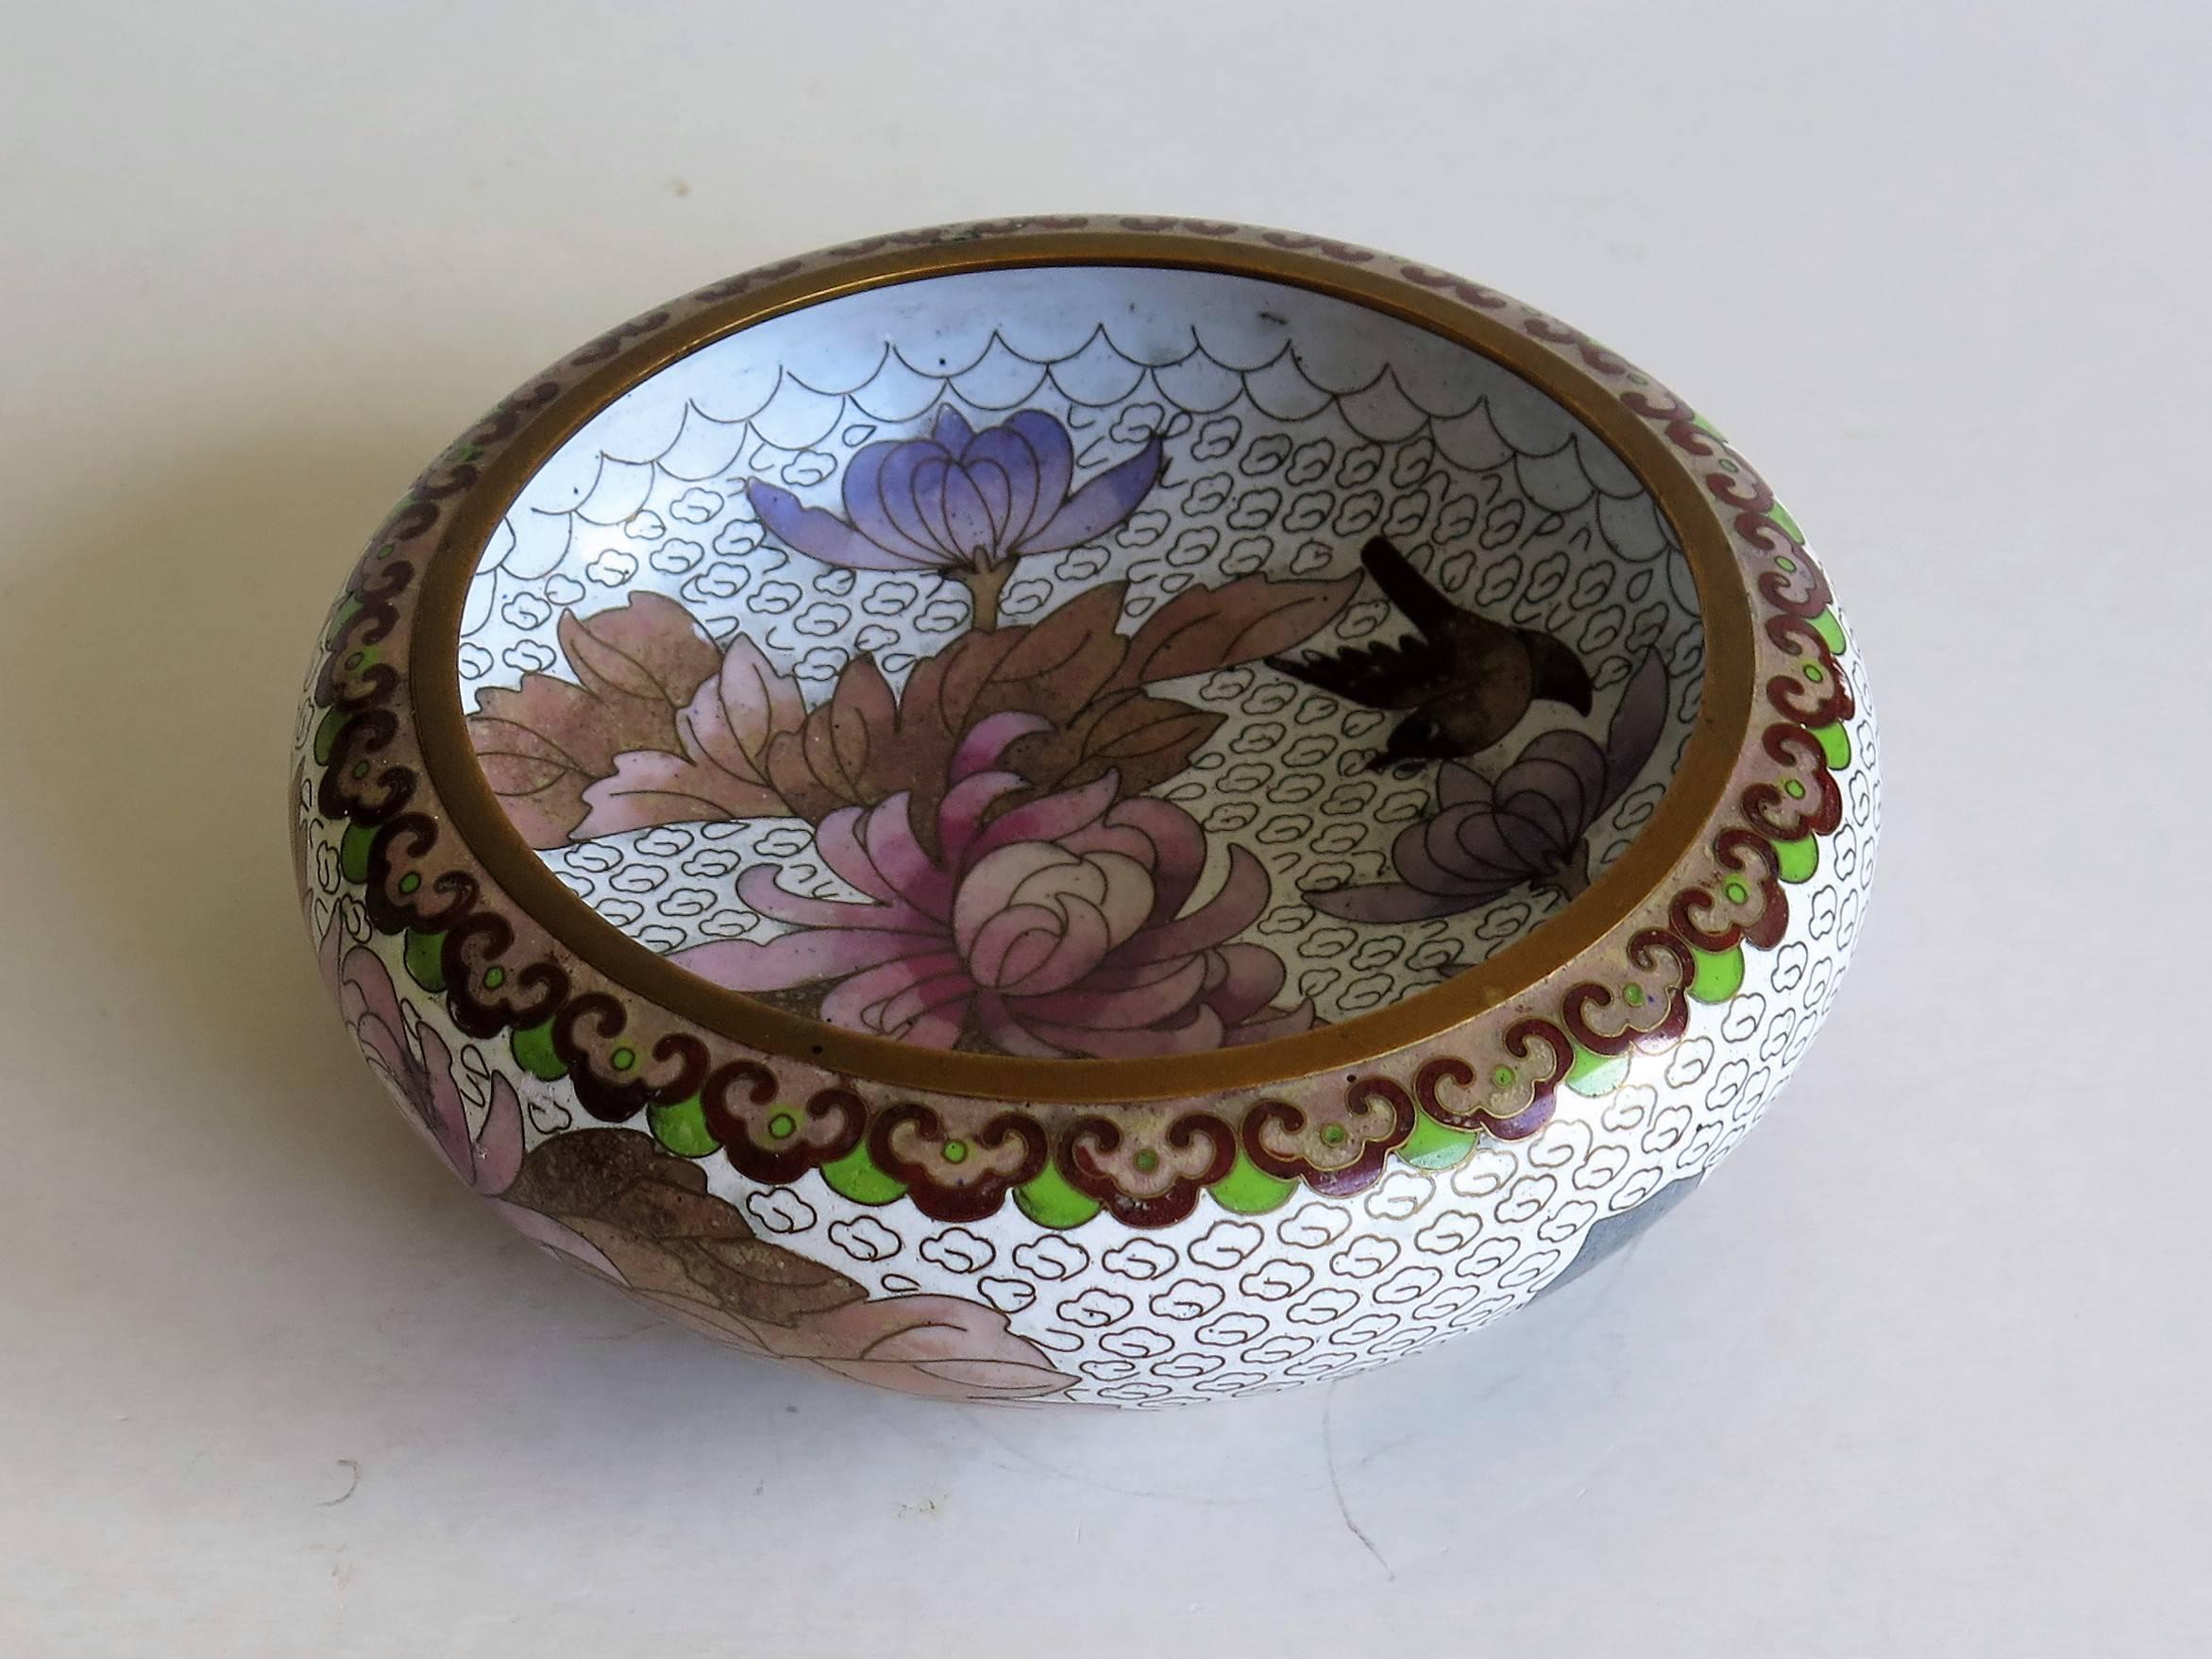 This is a very attractive Chinese cloisonné bowl, of a circular form on a short foot, which we date to the early 20th century, circa 1920.

The decoration shows large peonies and leaves with a bird flying above the flowers, both to the inside design